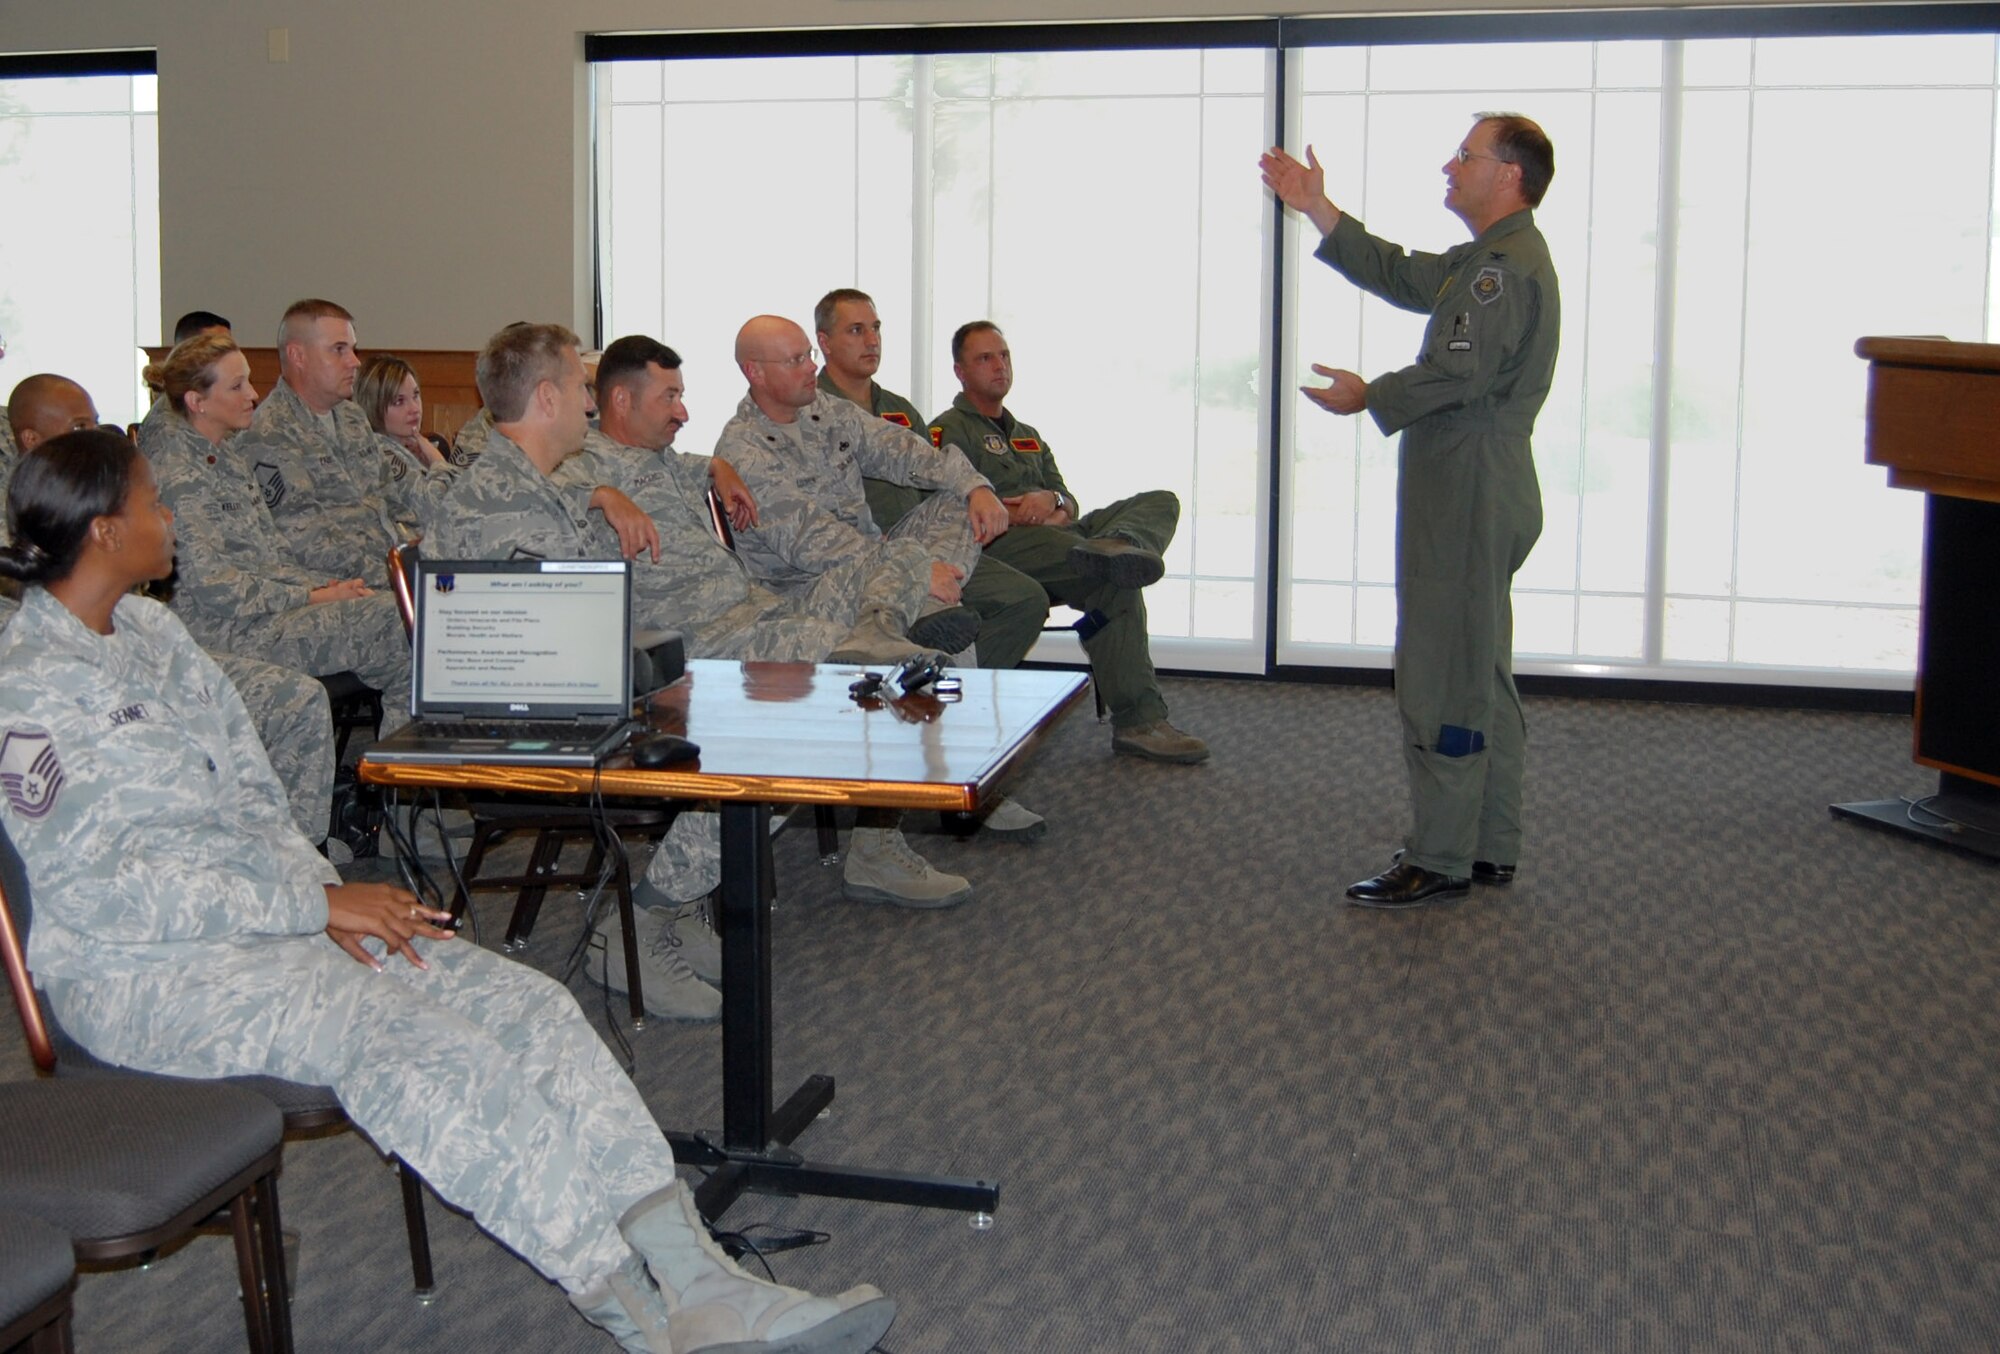 NELLIS AIR FORCE BASE, Nev. -- (Right) Col. Herman Brunke, Jr., 926th Group commander, briefs group personnel on the status of the unit and the way ahead during a commander's call here June 29. (U.S. Air Force photo/Capt. Jessica Martin)